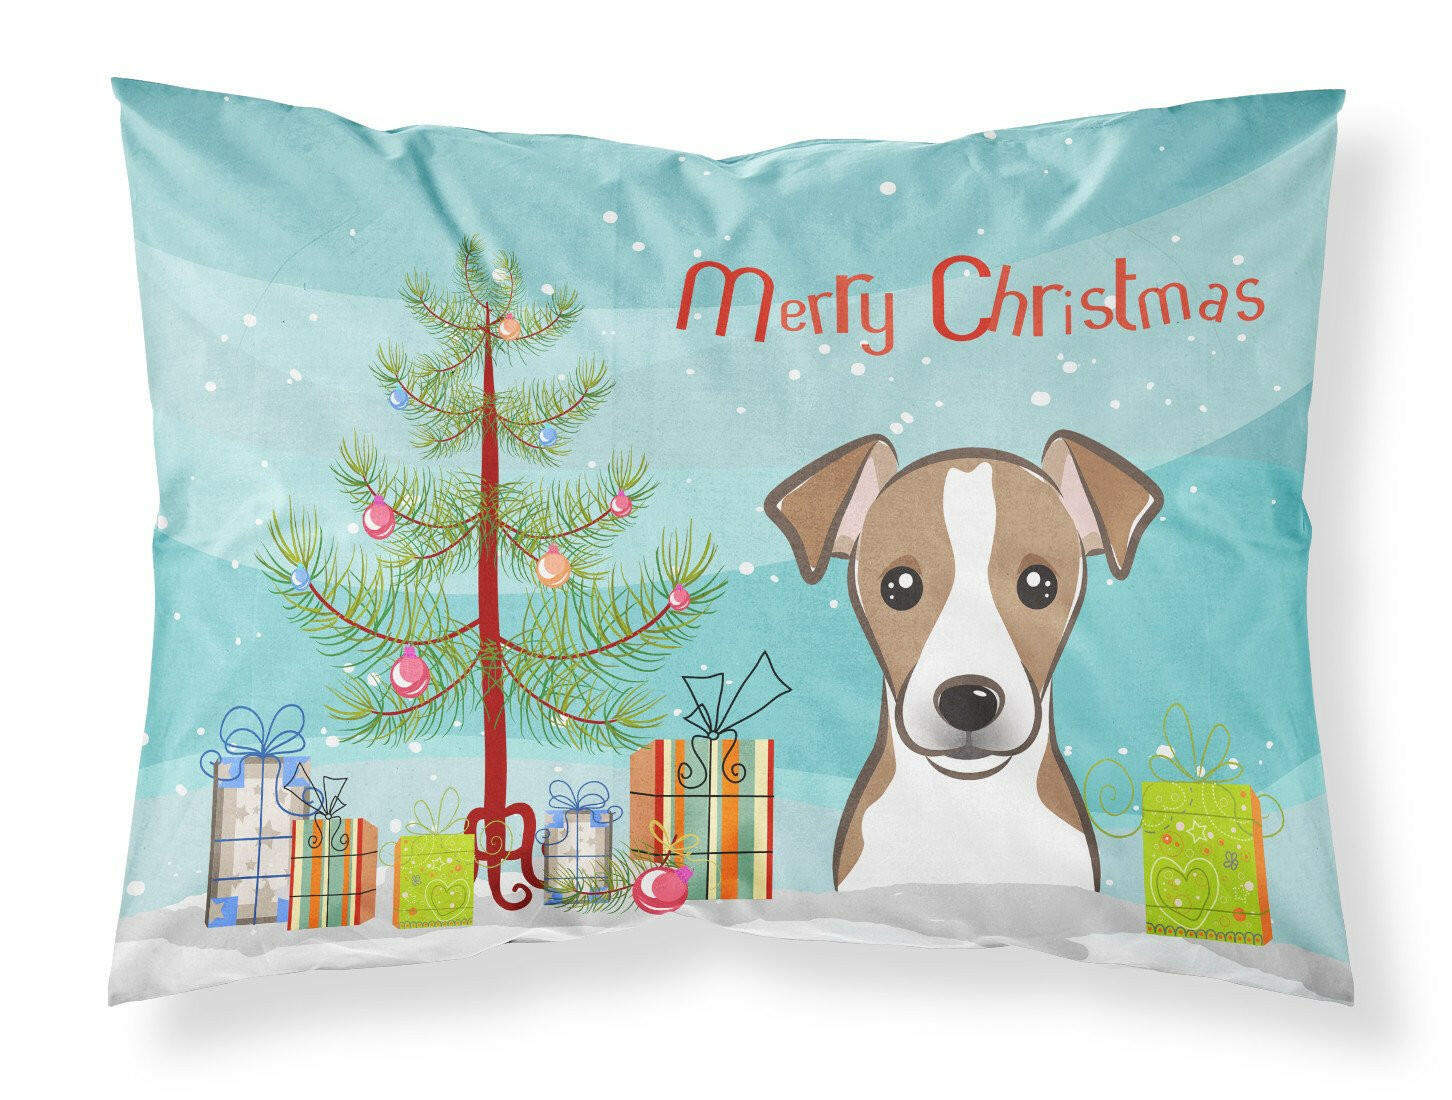 Christmas Tree and Jack Russell Terrier Fabric Standard Pillowcase BB1632PILLOWCASE by Caroline's Treasures